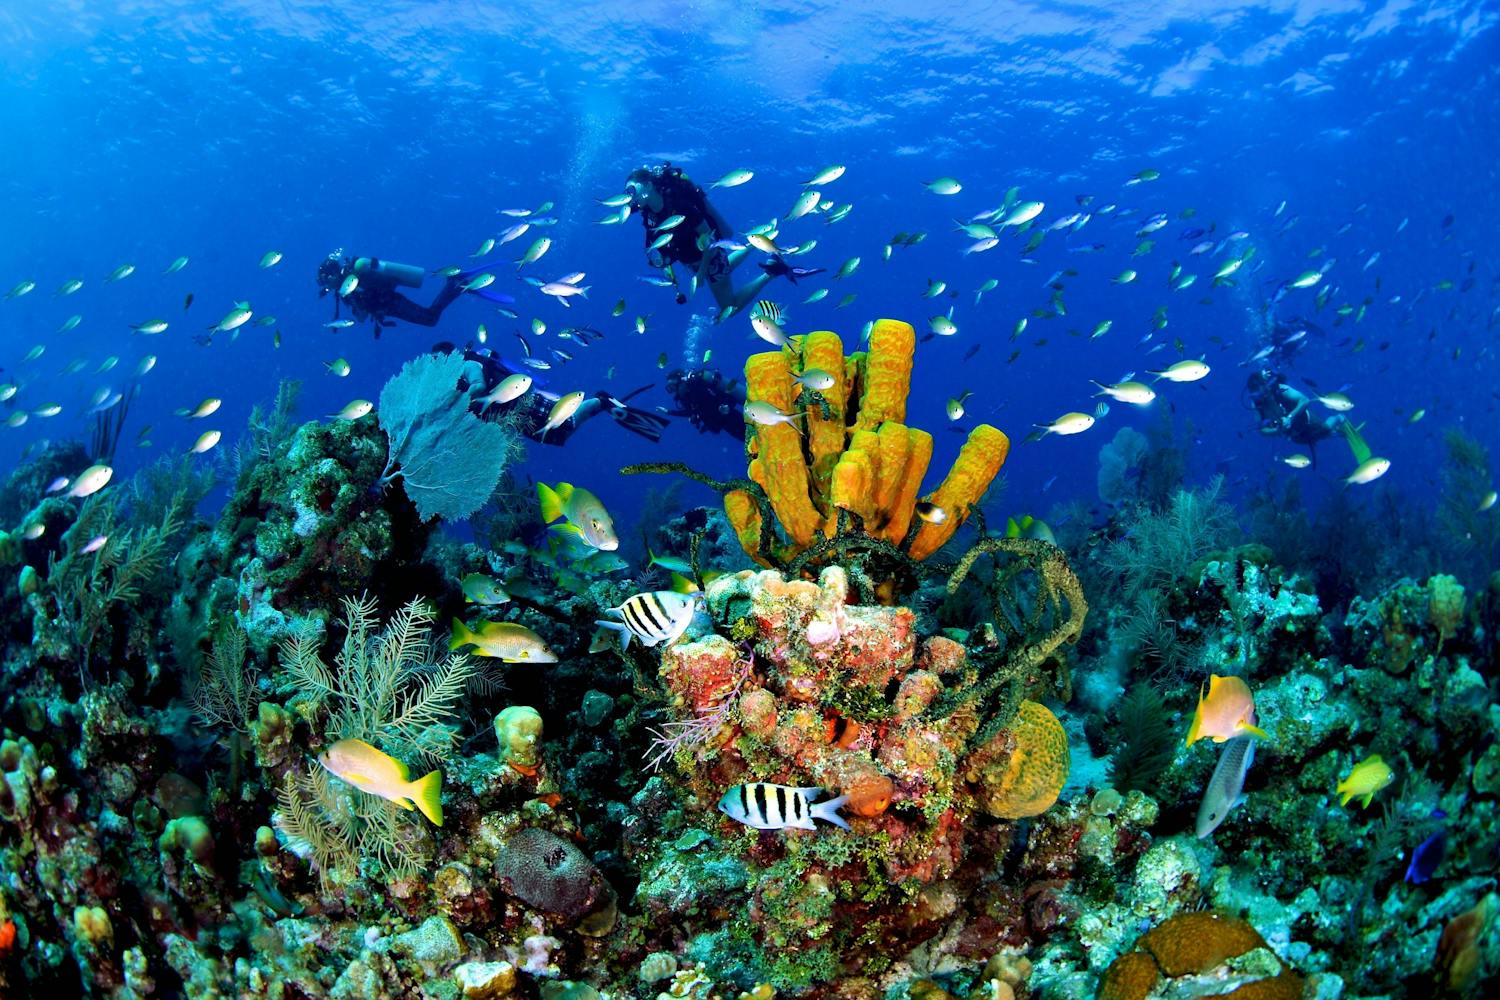 Scuba divers exploring the colourful Cayman Reef